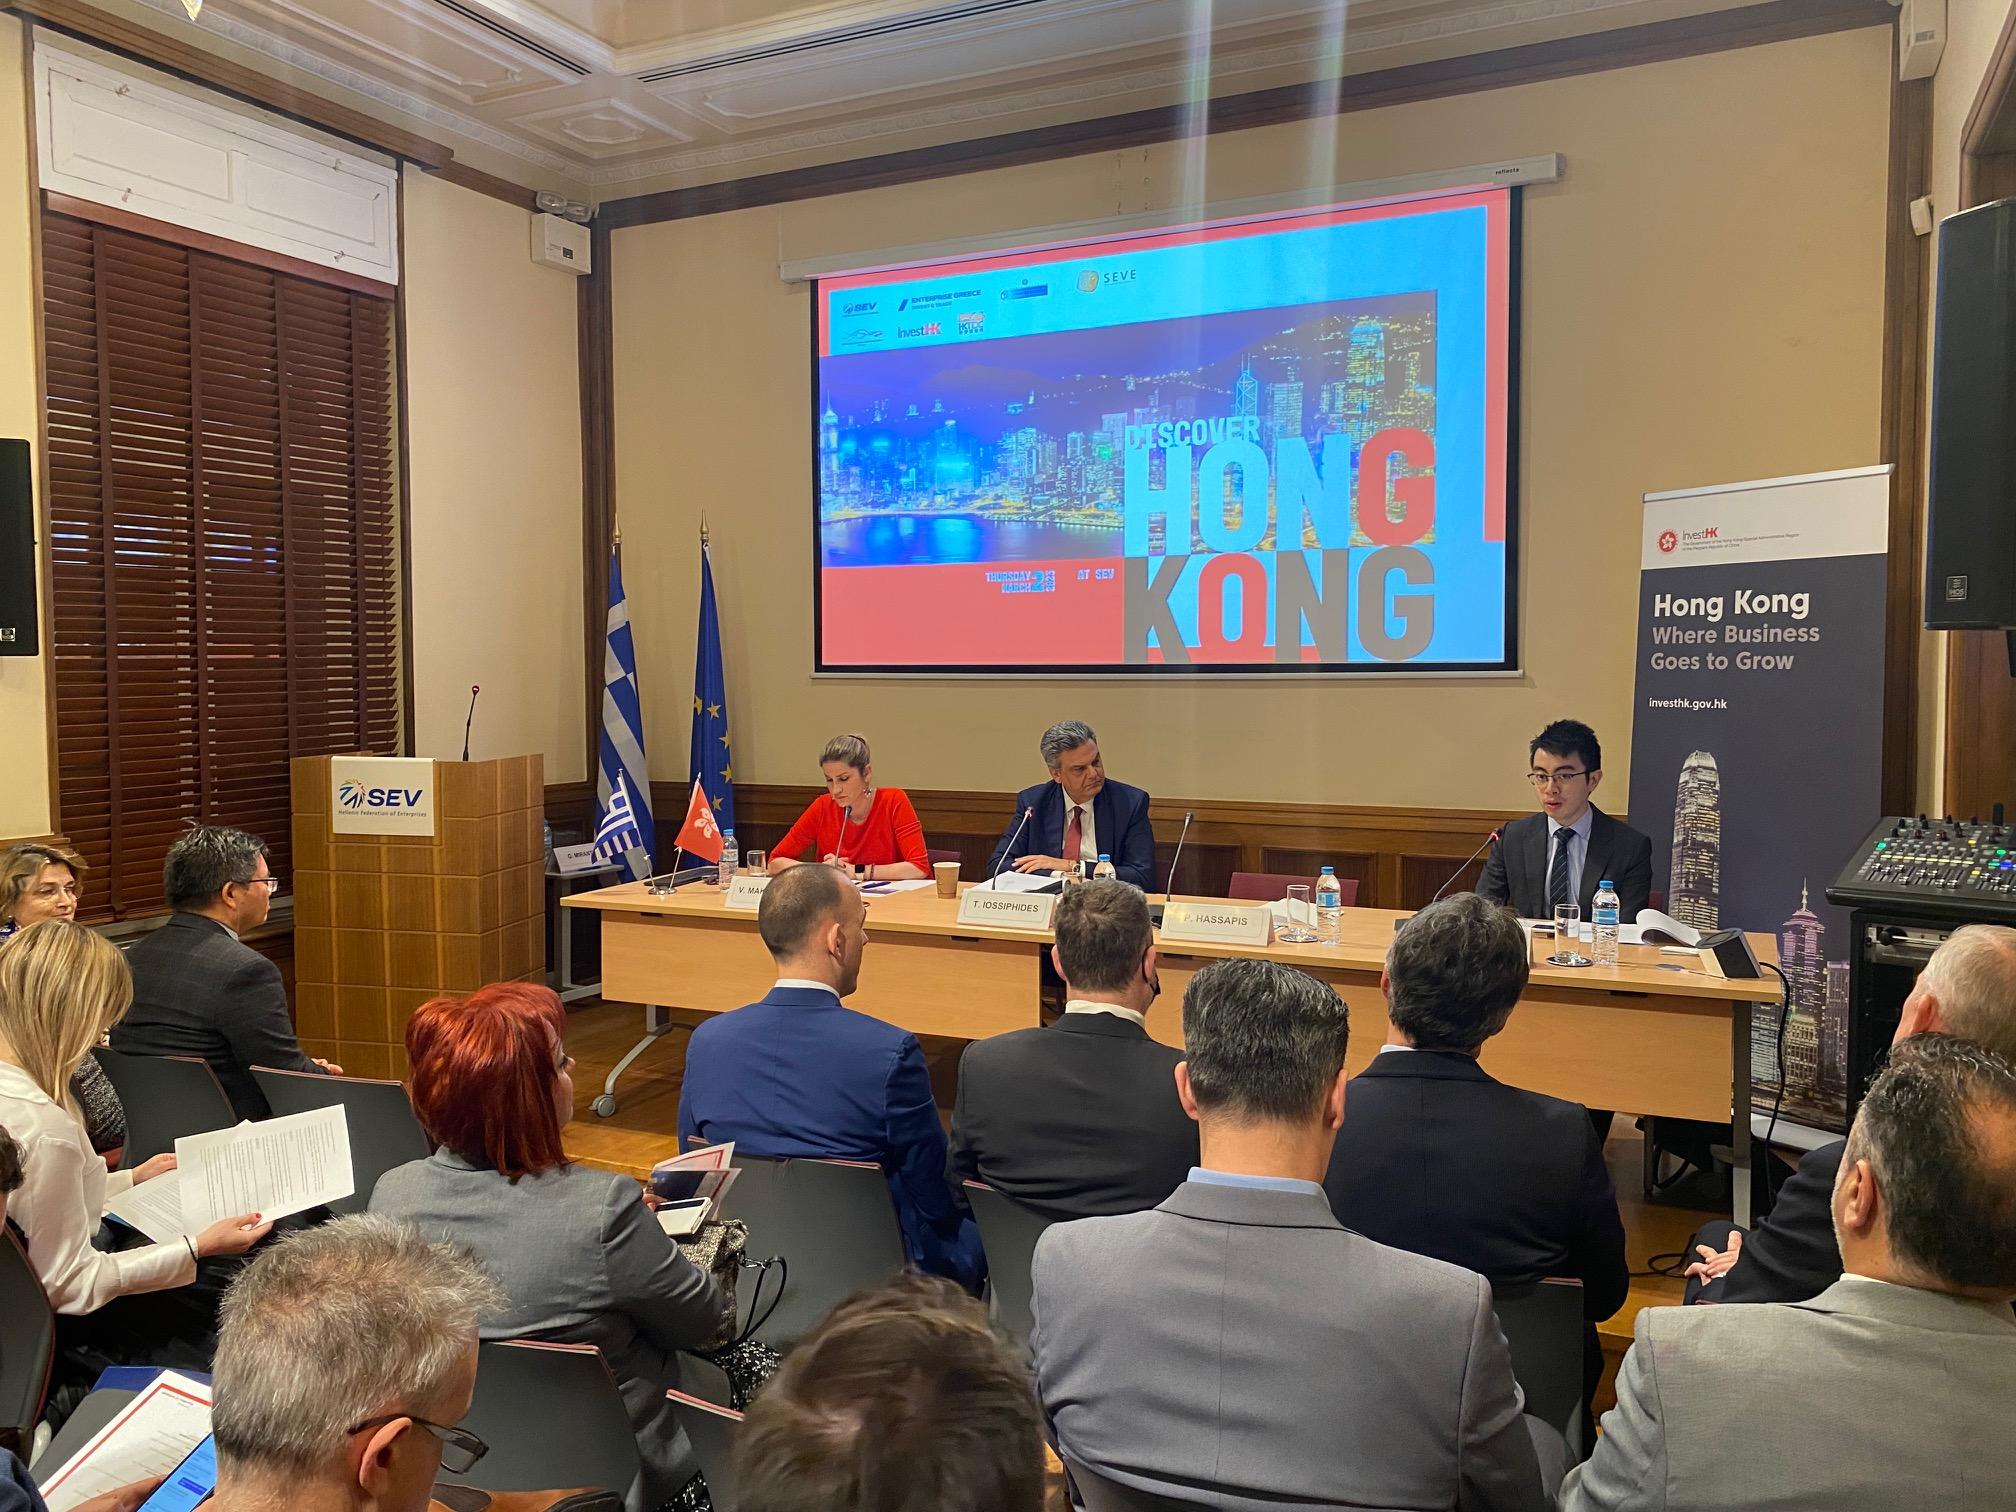 The Hong Kong Economic and Trade Office in Brussels (HKETO, Brussels) promoted Hong Kong business and investment opportunities to Greek entrepreneurs at a seminar in Athens on March 2 (Greek time). Photo shows Deputy Representative of HKETO, Brussels Mr Henry Tsoi, addressing participants at the seminar.